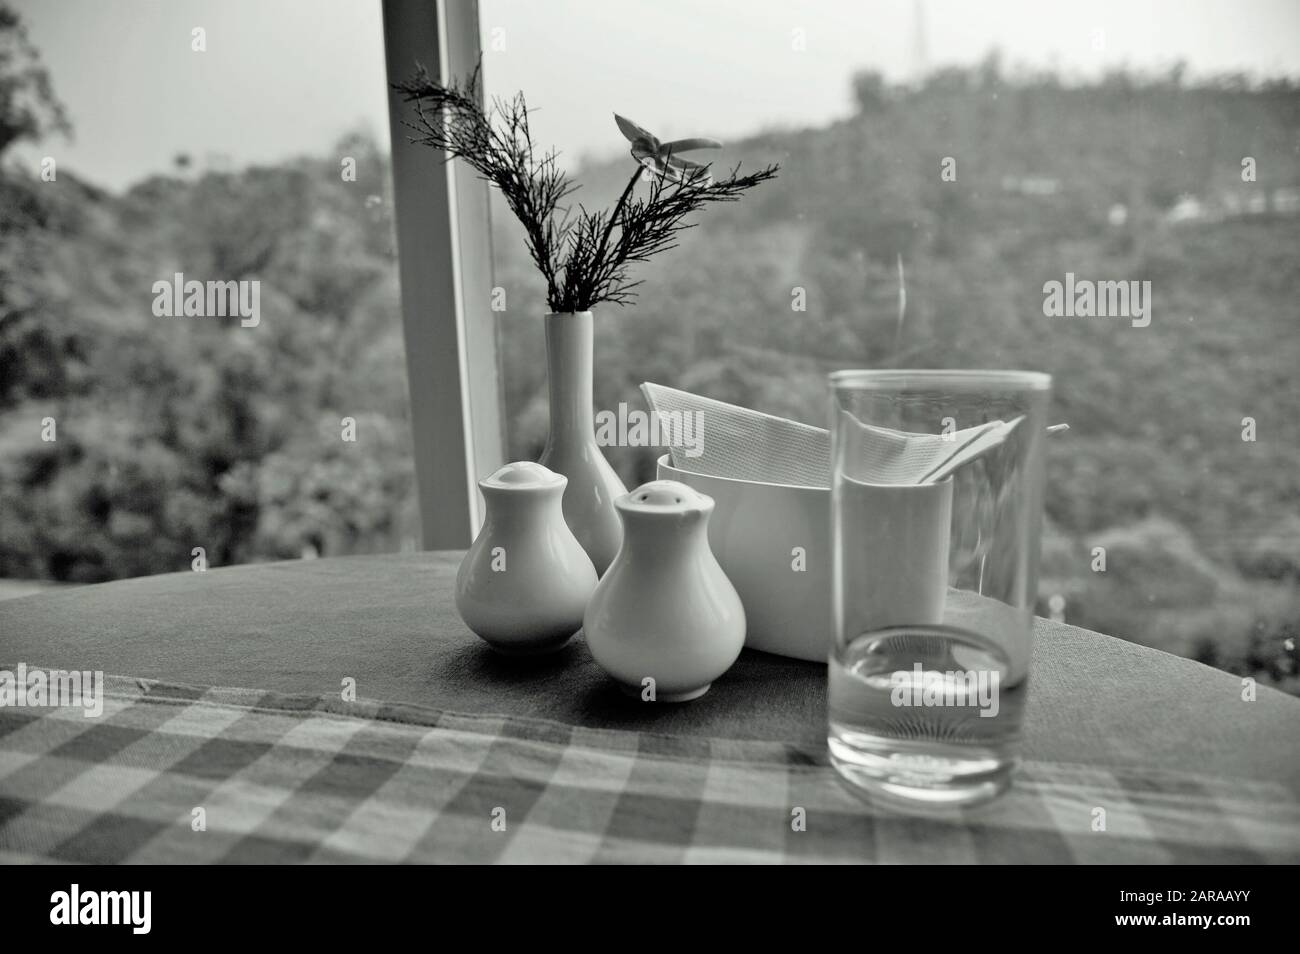 Salt and pepper shakers with water glass and flower vase on table, Munnar, Idukki, Kerala, India, Asia Stock Photo